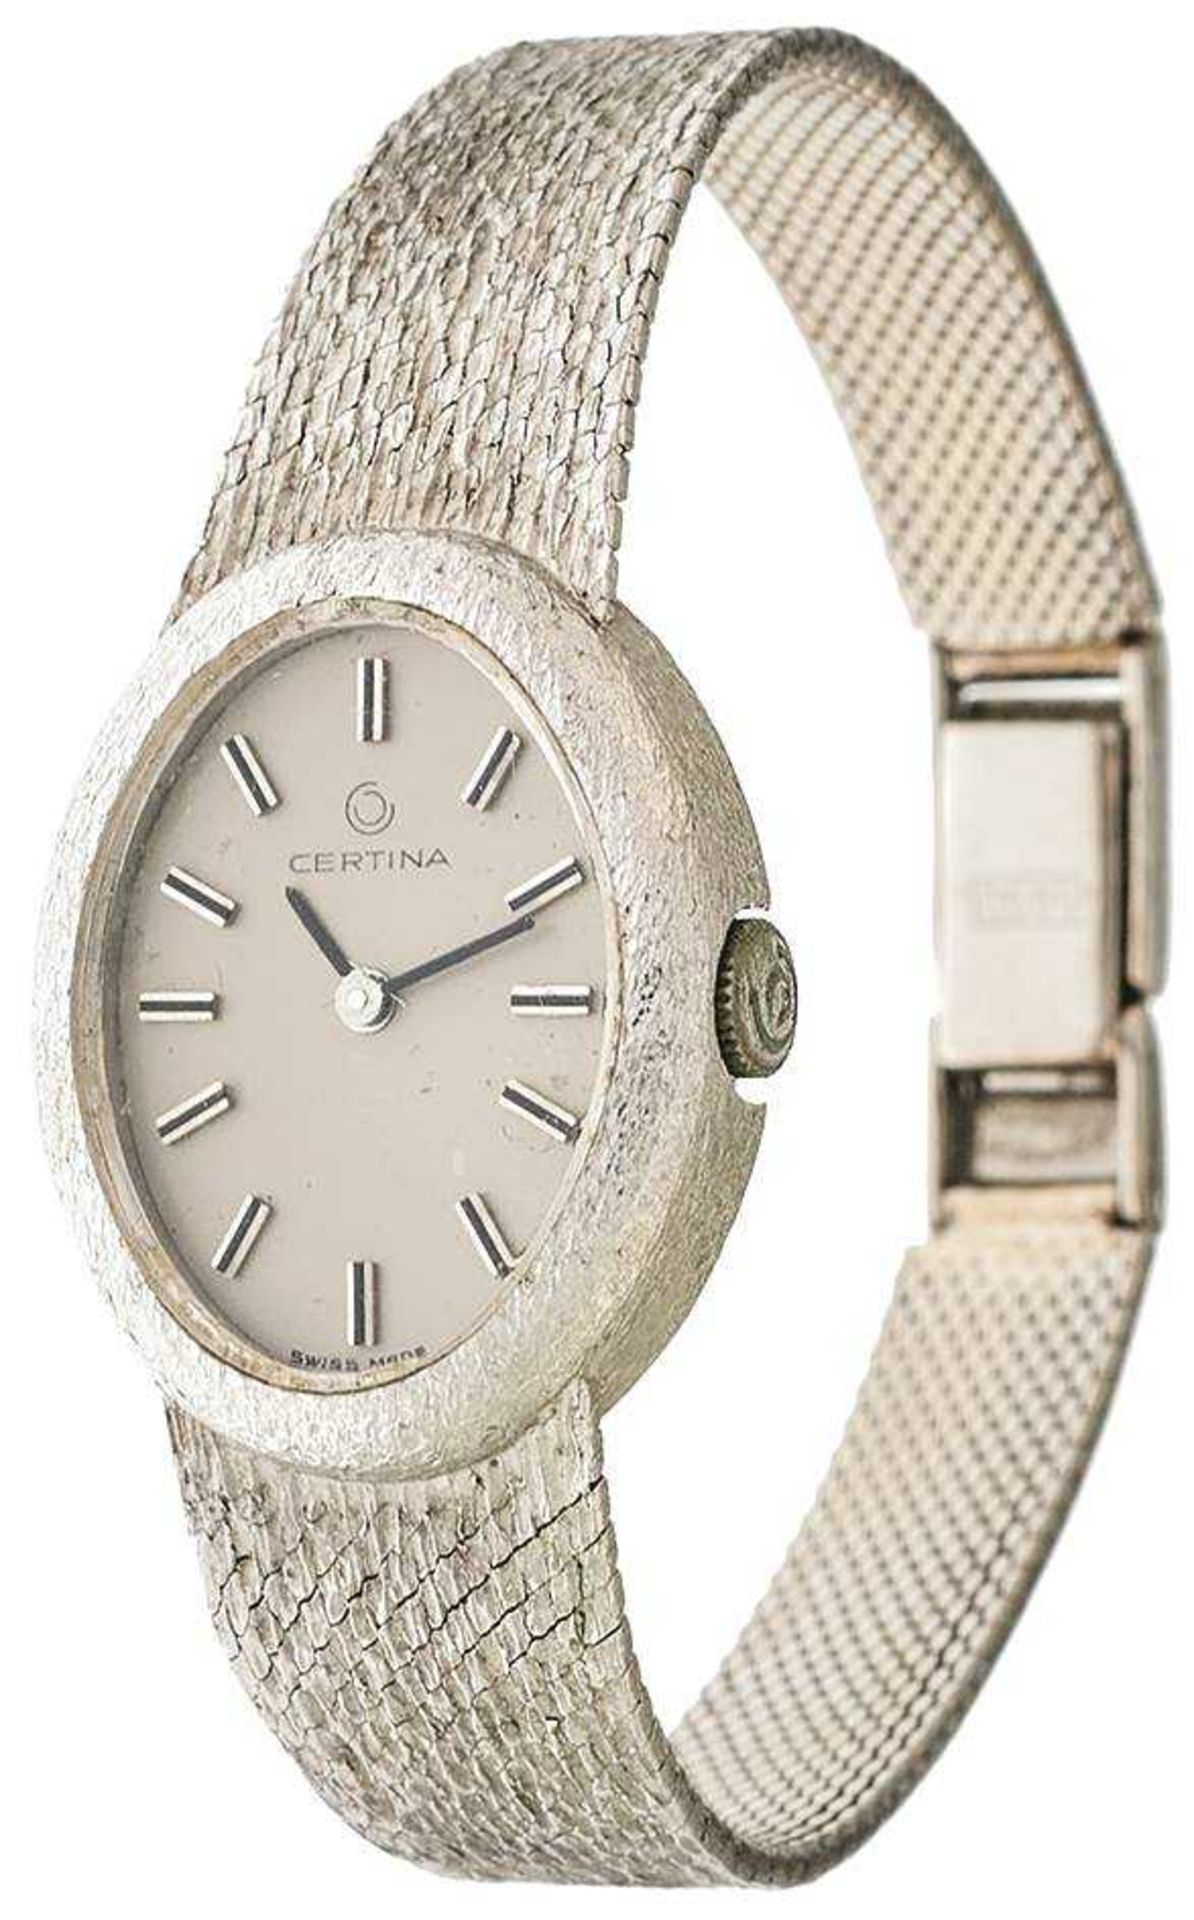 Certina womens watch. Ca. 20 mm, 585er white gold, quartz. Silver-coloured dial with black indexes a